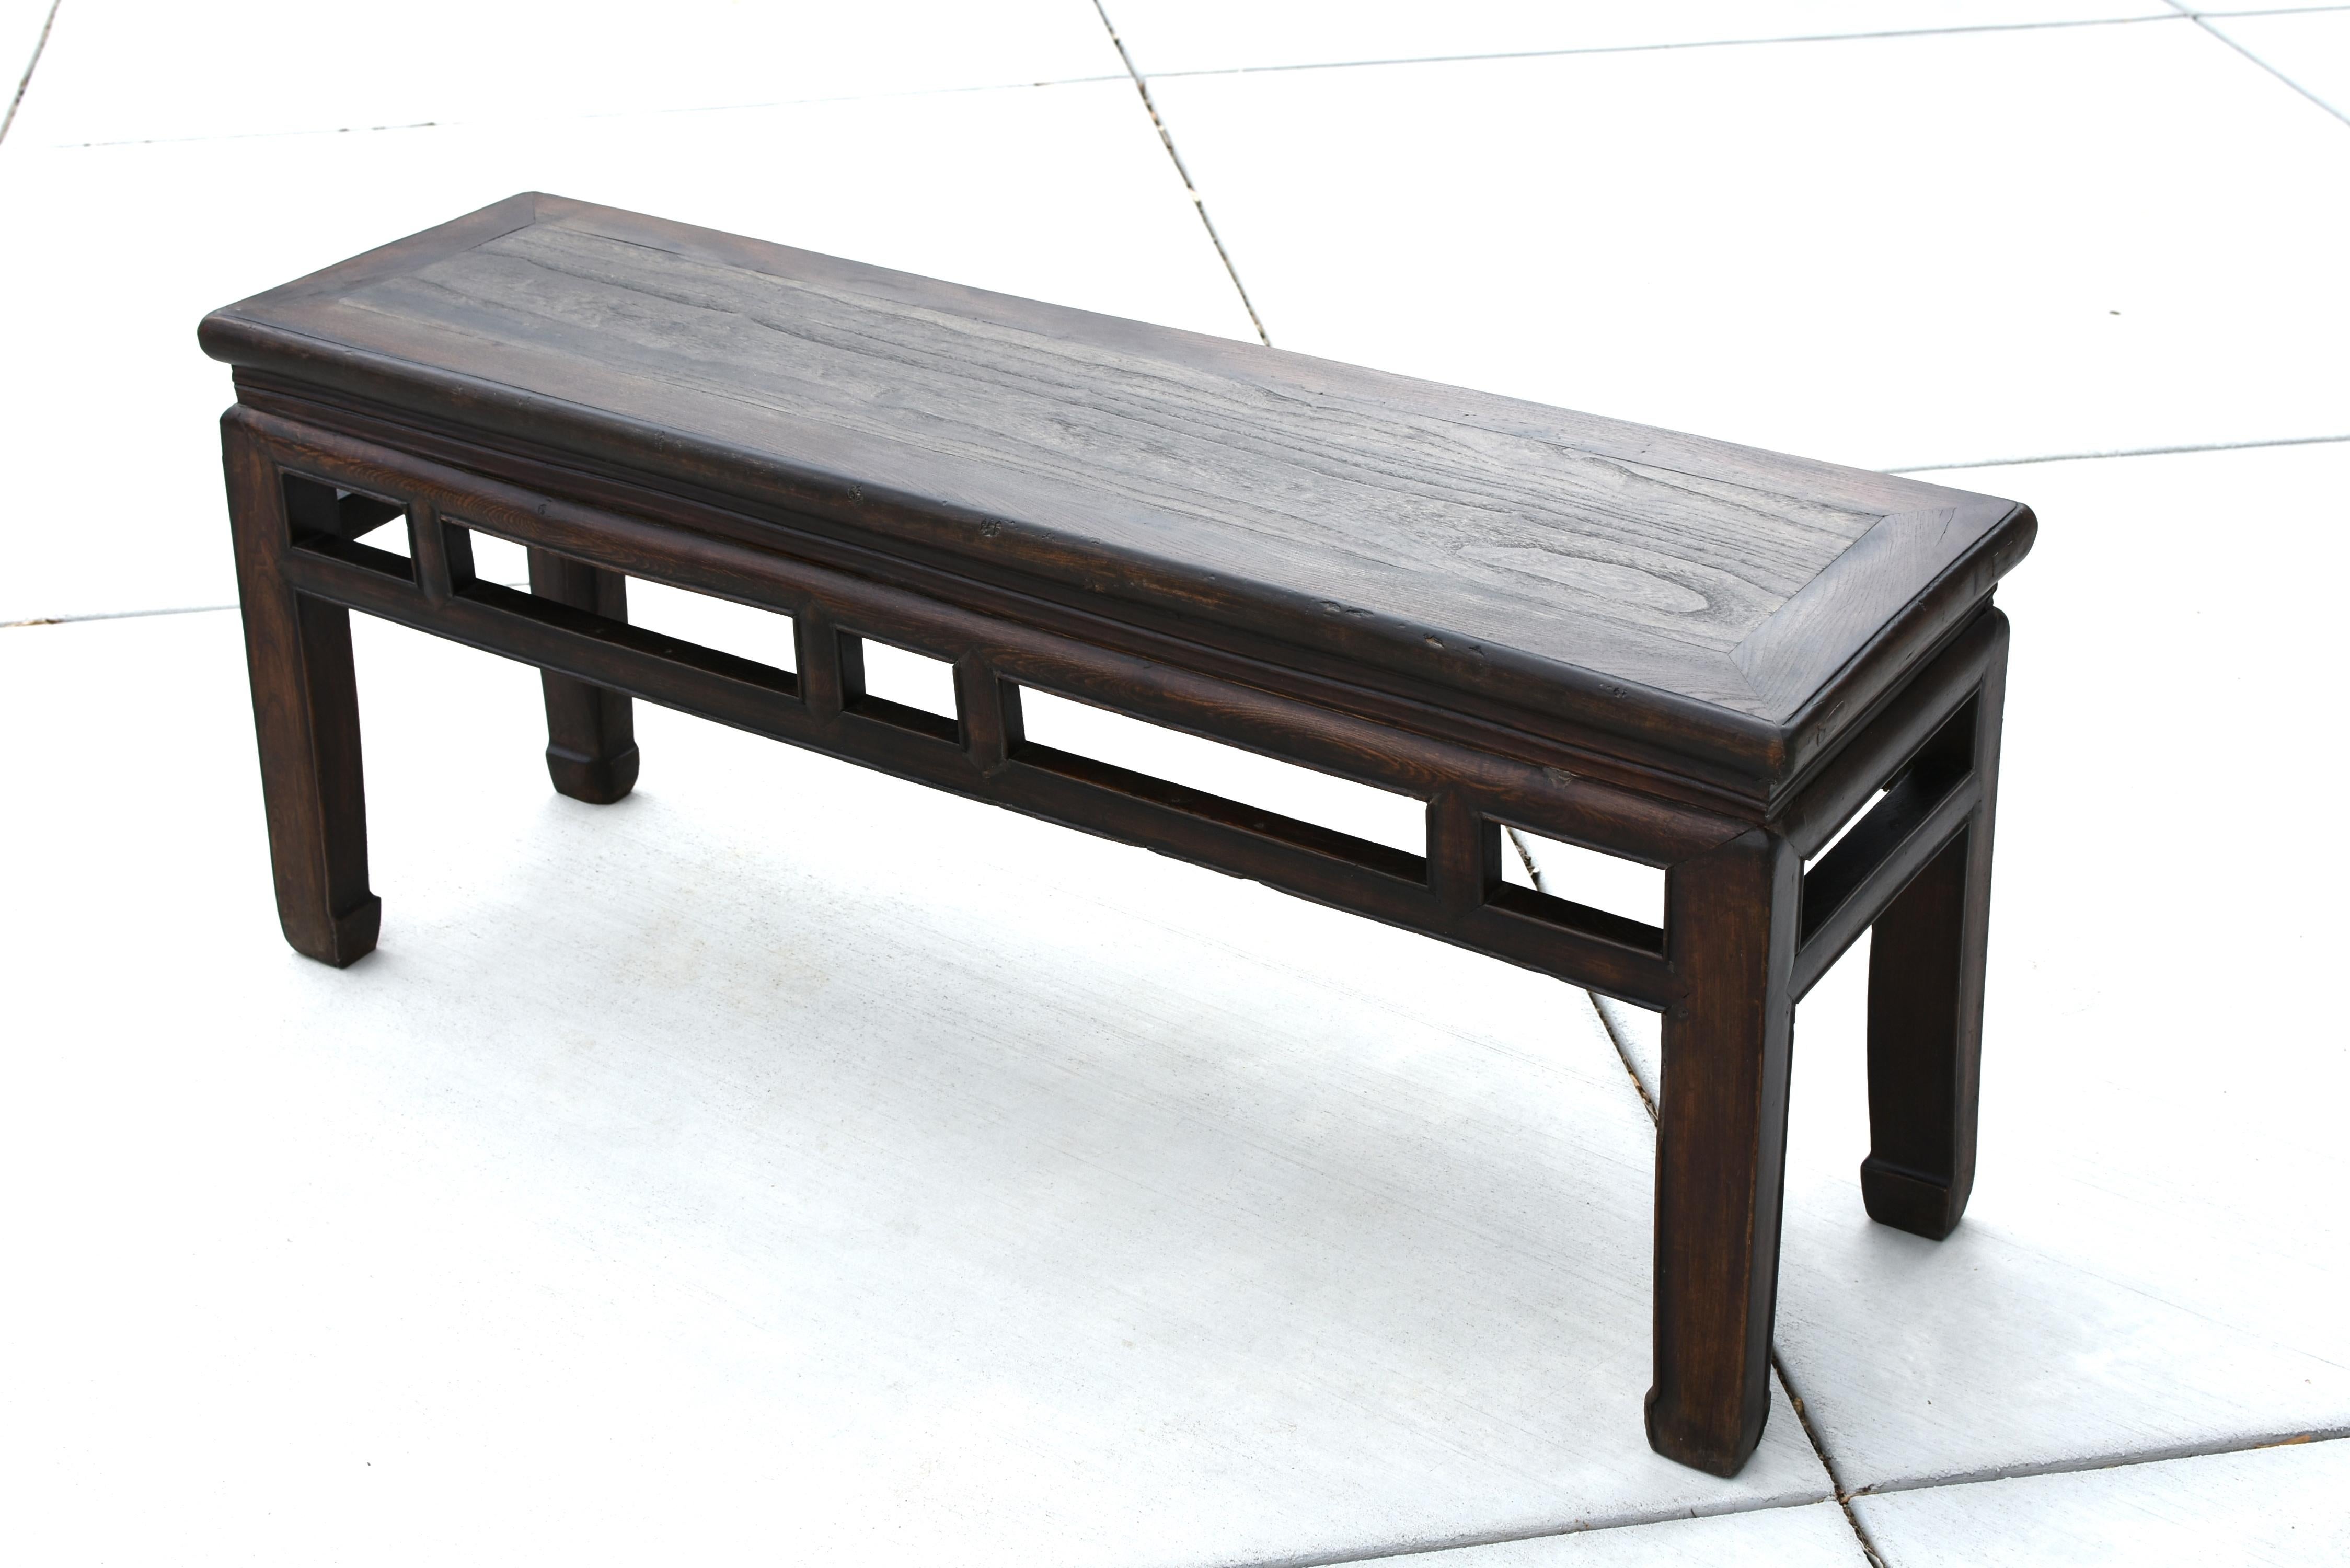 A beautiful, solid wood, 19th century antique bench from the region south of China's YangZi River. Solid single board inset in floating panel structure. Cinched waist. Geometric accent bars both decorative and functional in strengthening the